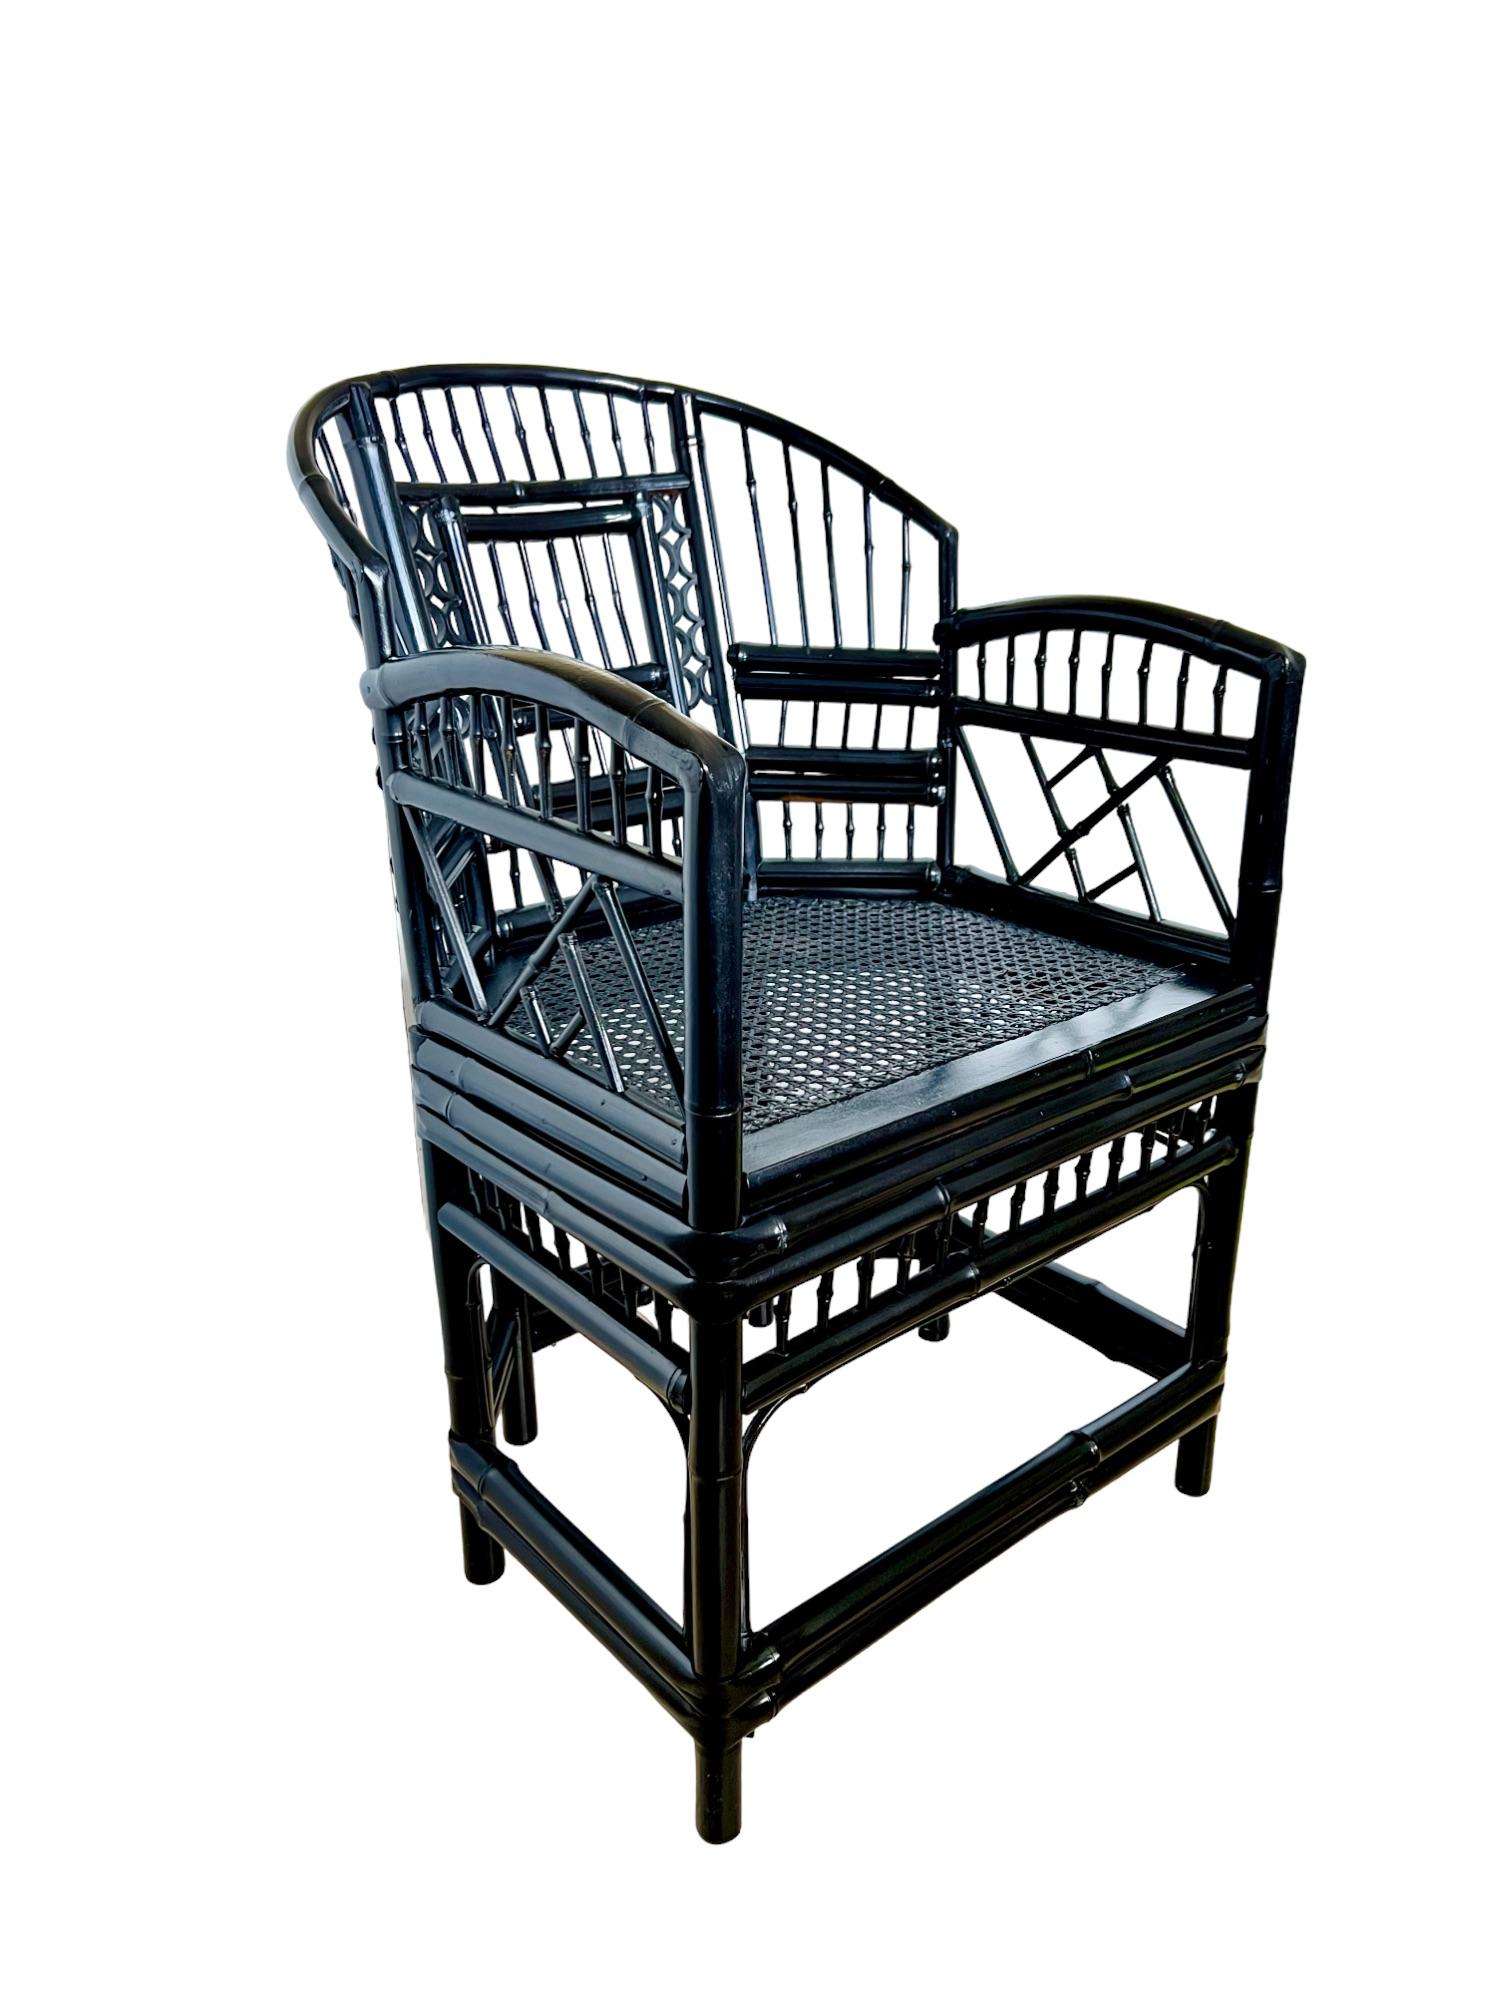 Caning Vintage chinoiserie Brighton Pavilion Gloss Black Bamboo Chair